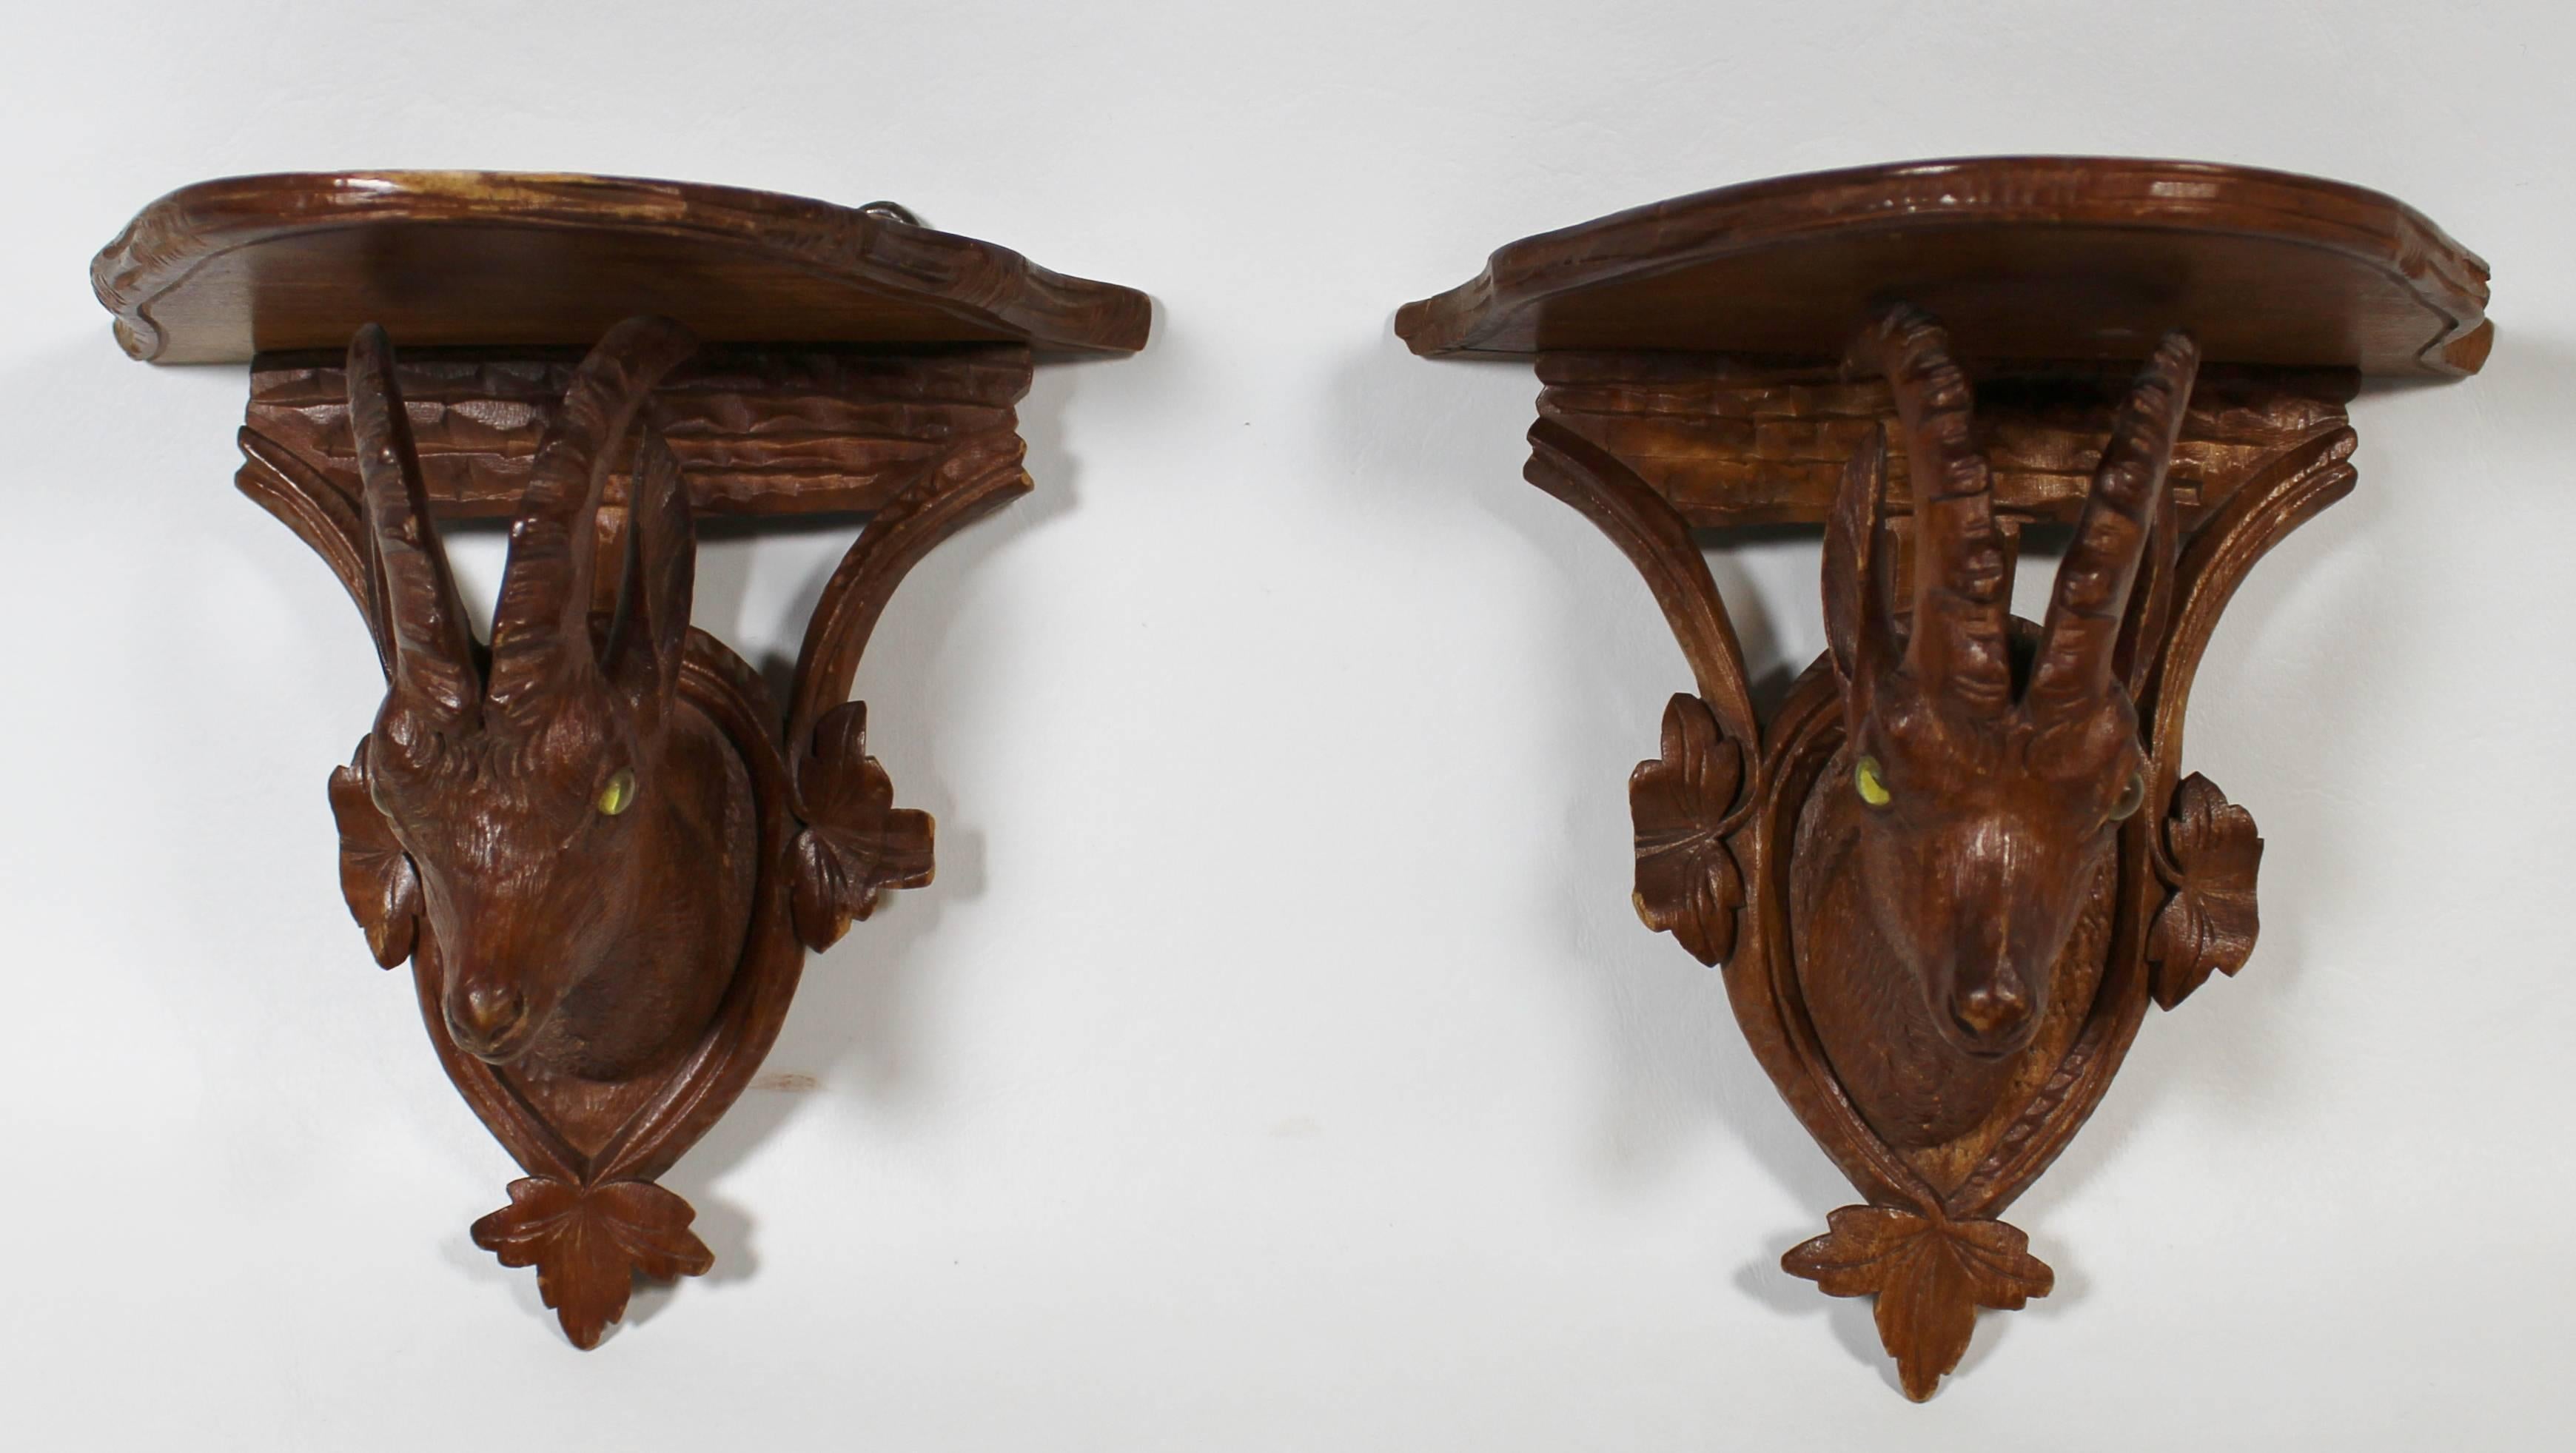 German Pair of 19th Century Black Forest Carved Ibex Shelves